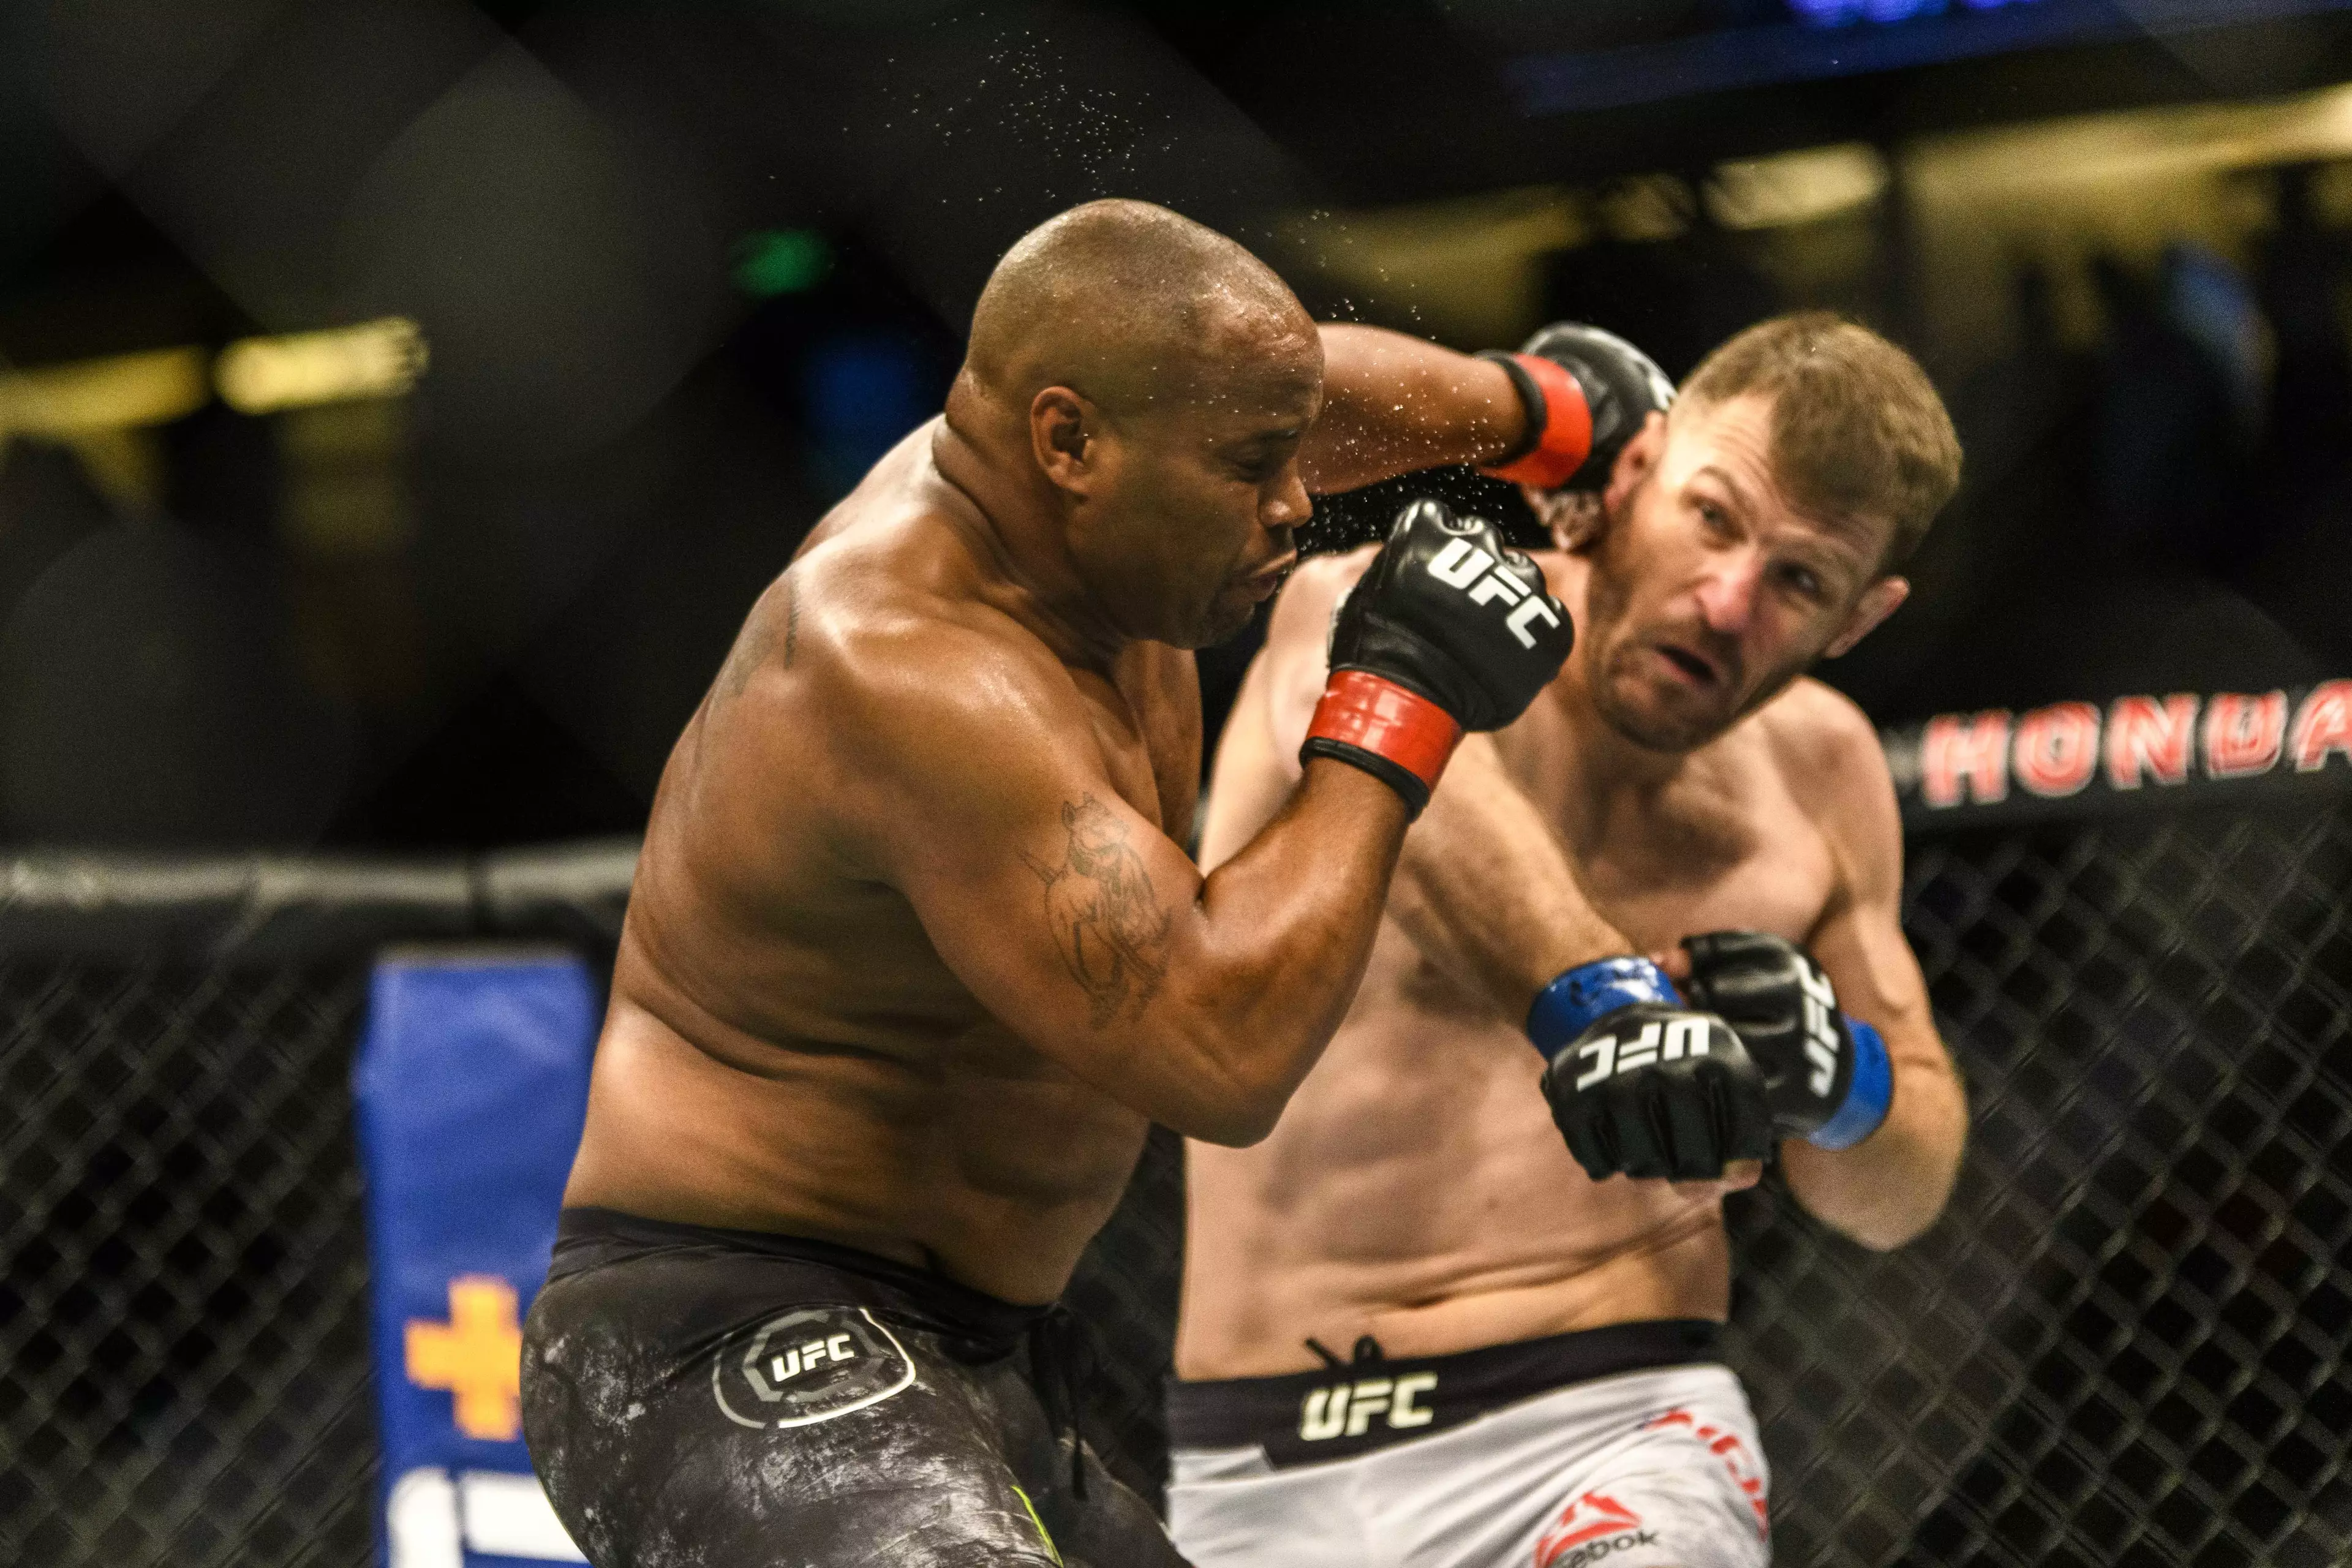 Stipe Miocic beat Daniel Cormier at UFC 241 to win back the heavyweight title